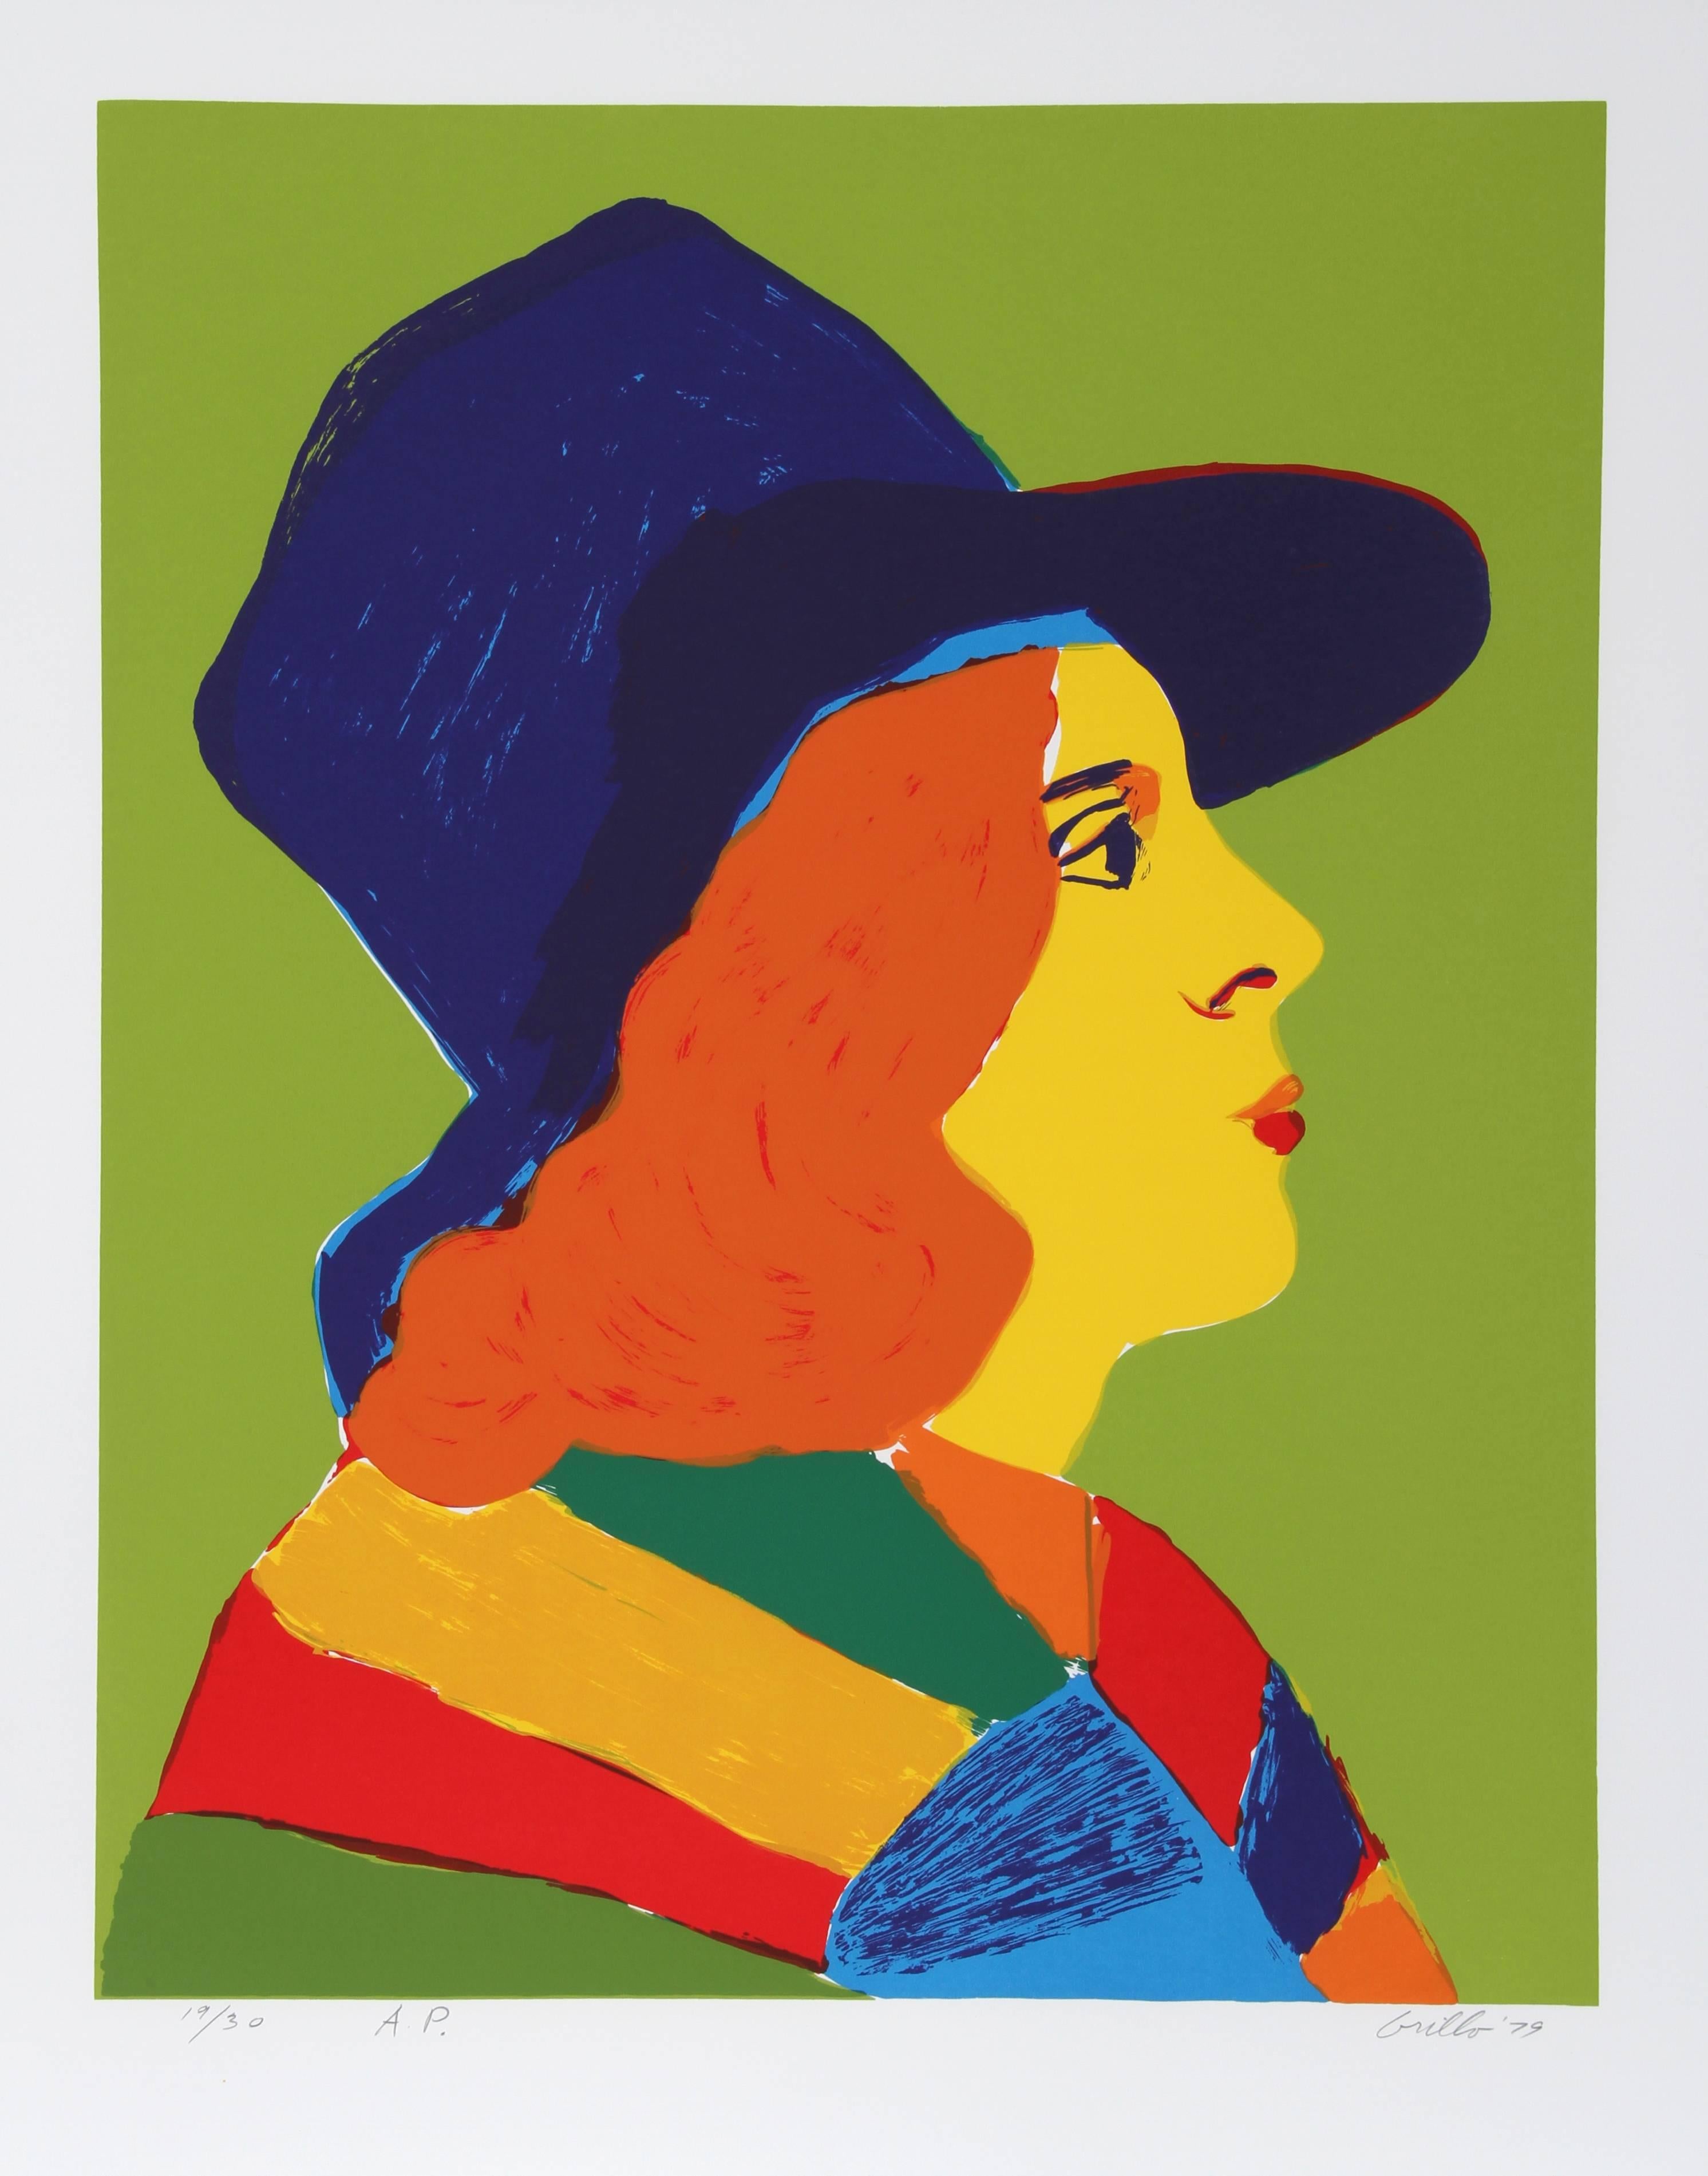 Artist:  John Grillo, American (1917 - 2014)
Title:  Girl with Hat I
Year:  1979
Medium:  Serigraph, signed and numbered in pencil
Edition:  200, AP 30
Image Size:  28.5 x 22.5 inches
Size:  33 in. x 26 in. (83.82 cm x 66.04 cm)